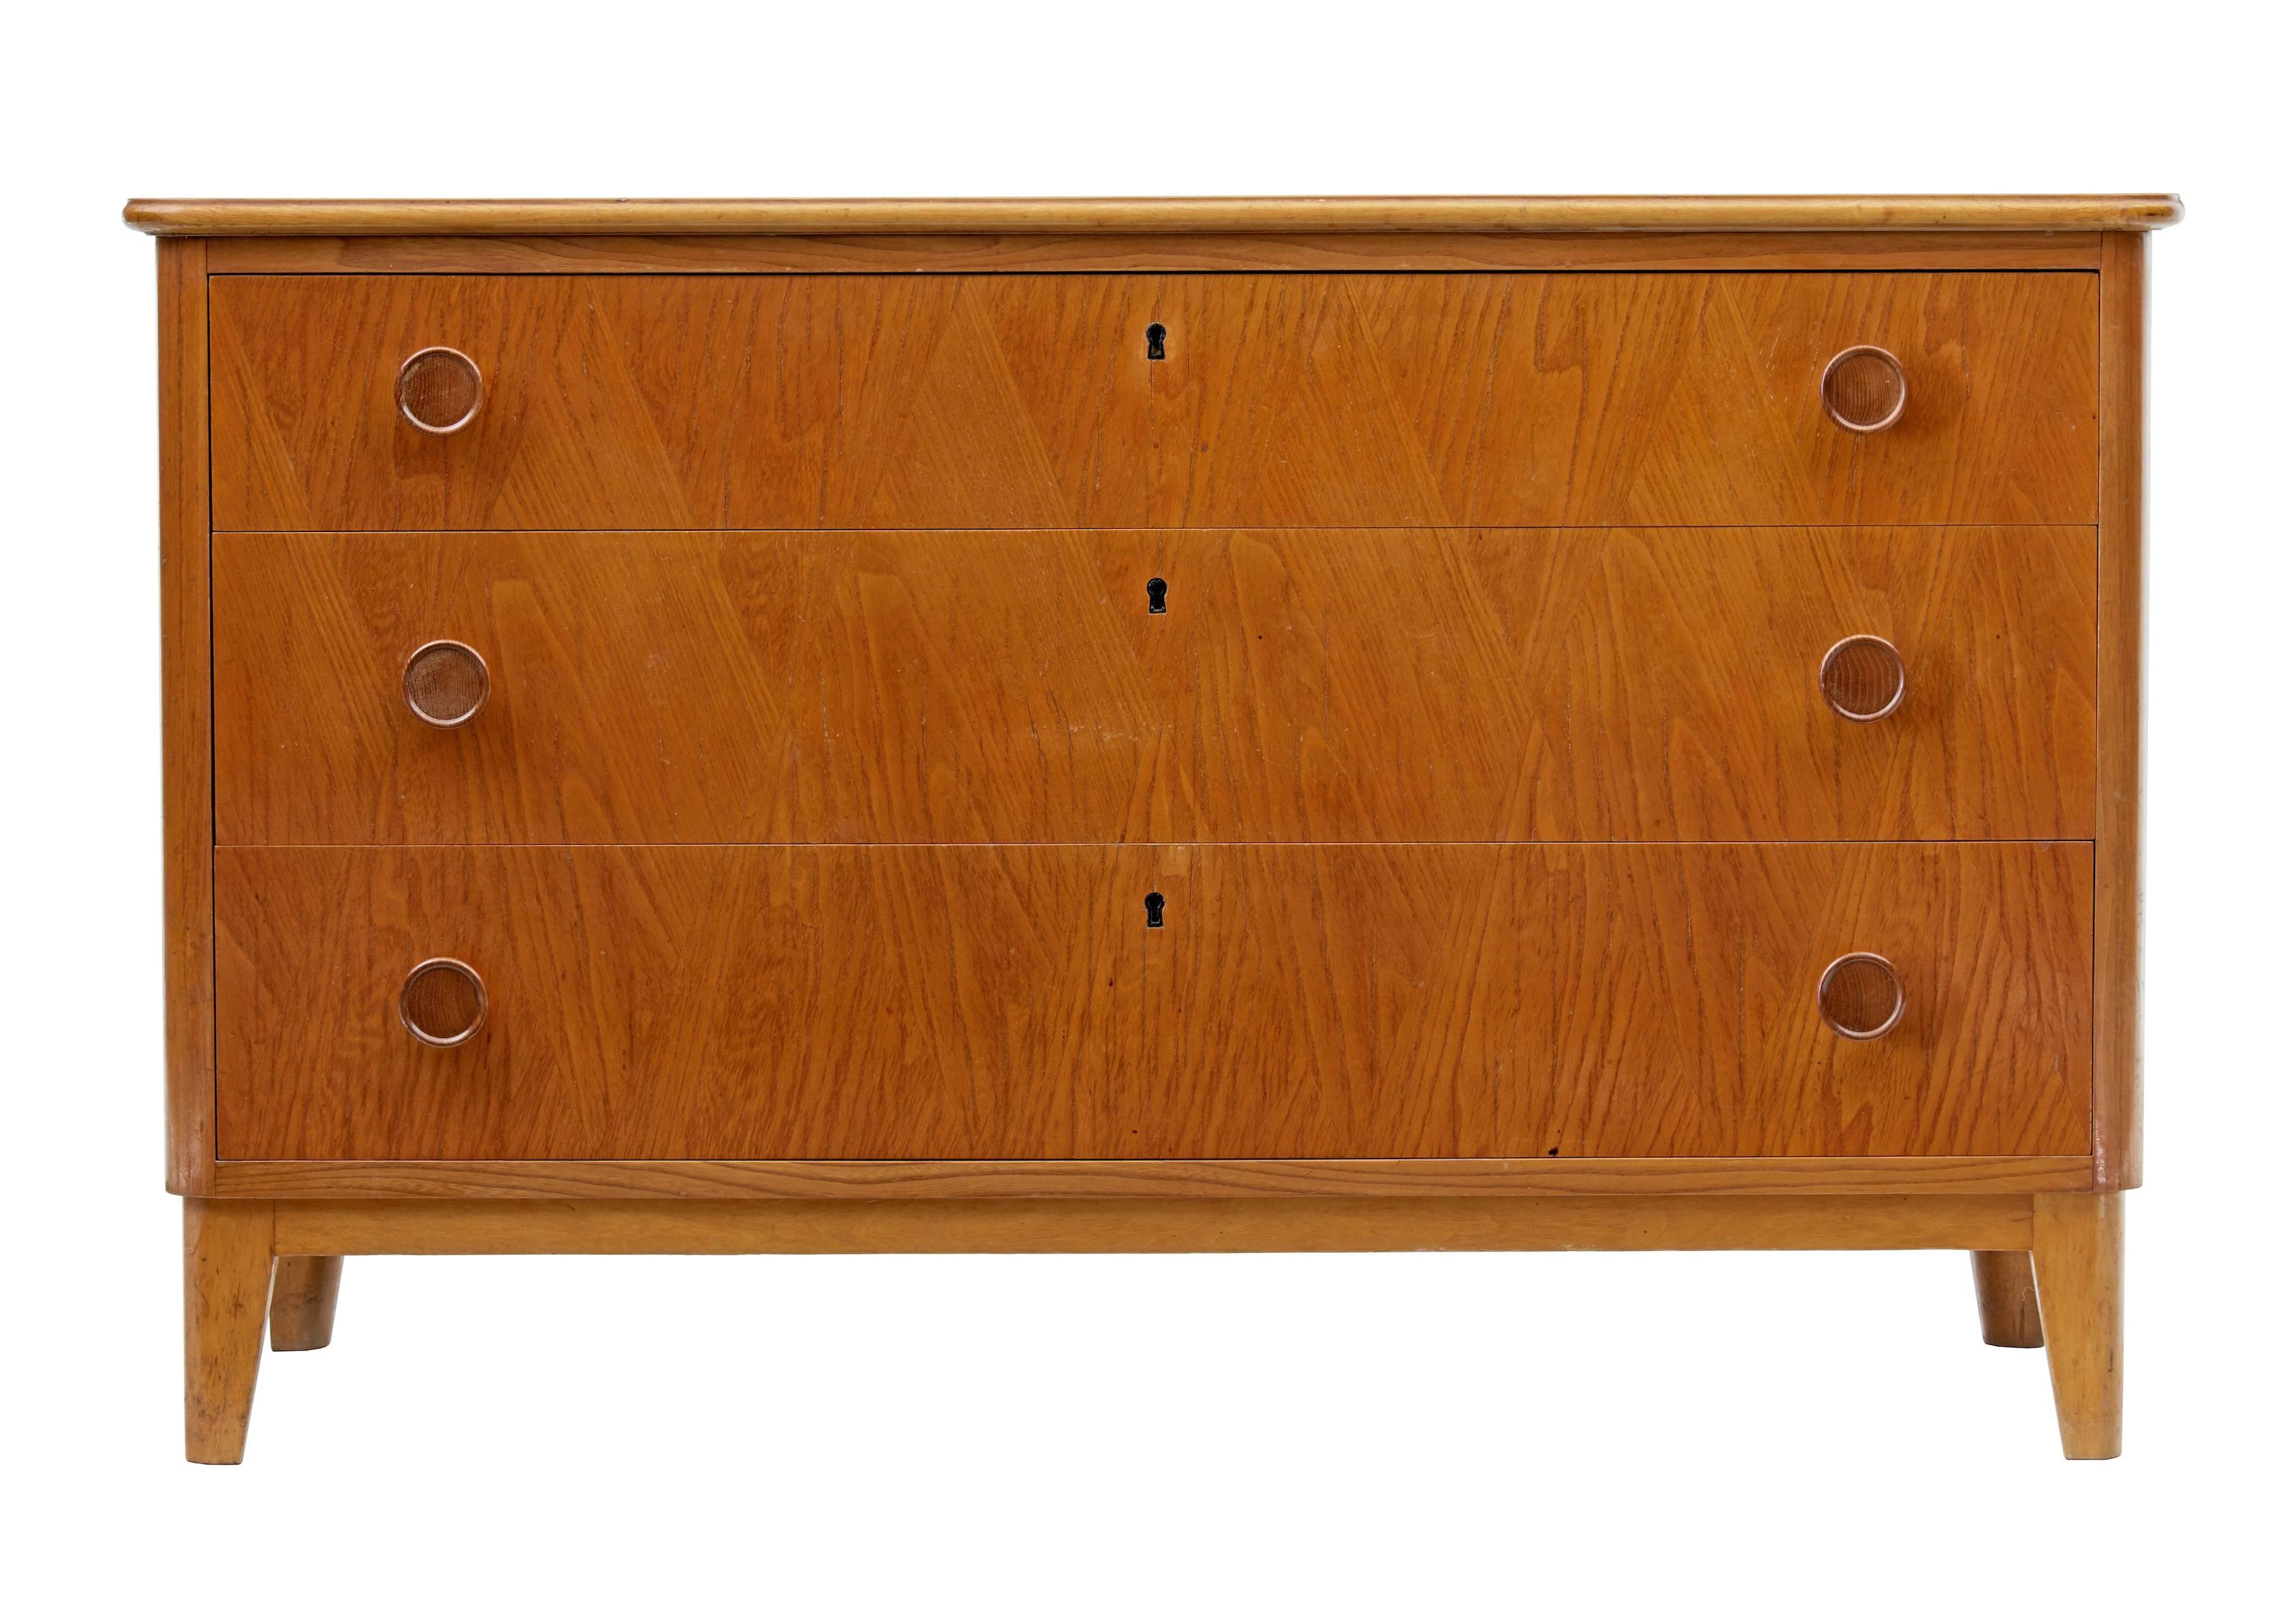 Birch and elm chest of drawers, circa 1950.
Three drawer chest with turned handles.
Birch frame with elm veneered door fronts.
Some surface marks to top.

Measures: Height 25 1/4"
Width 41"
Depth 17 1/4".
  